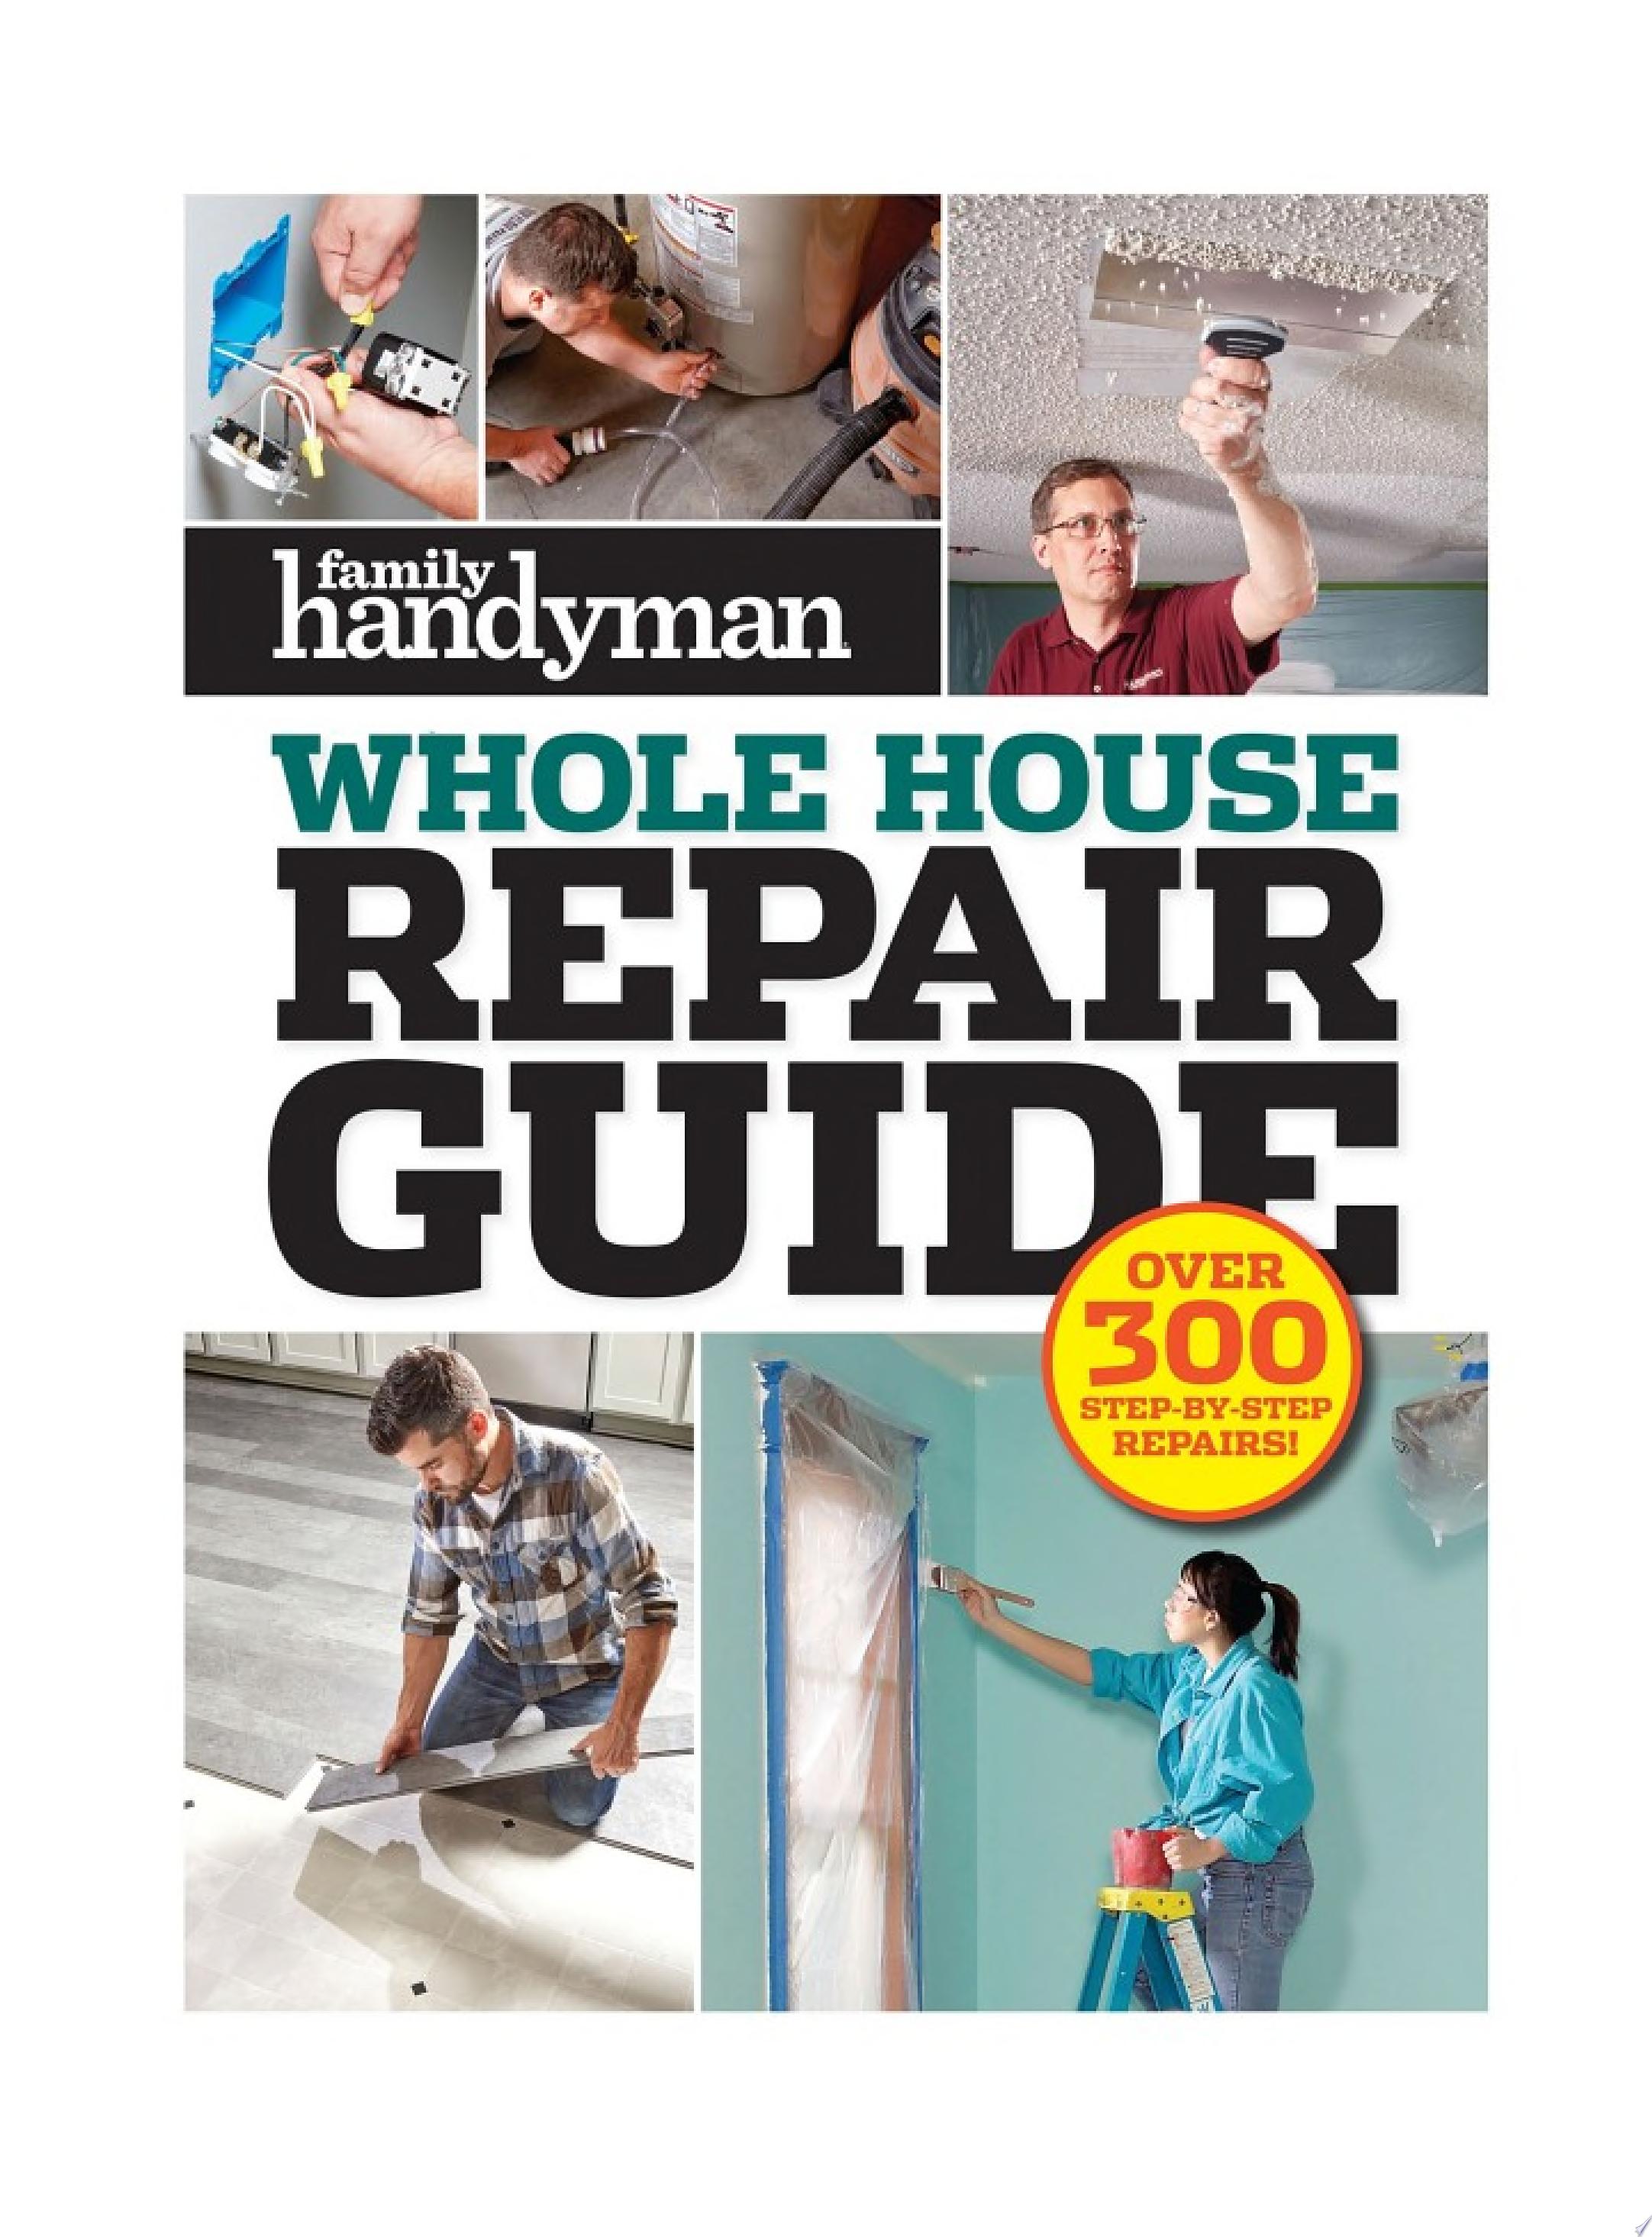 Image for "Family Handyman Whole House Repair Guide"